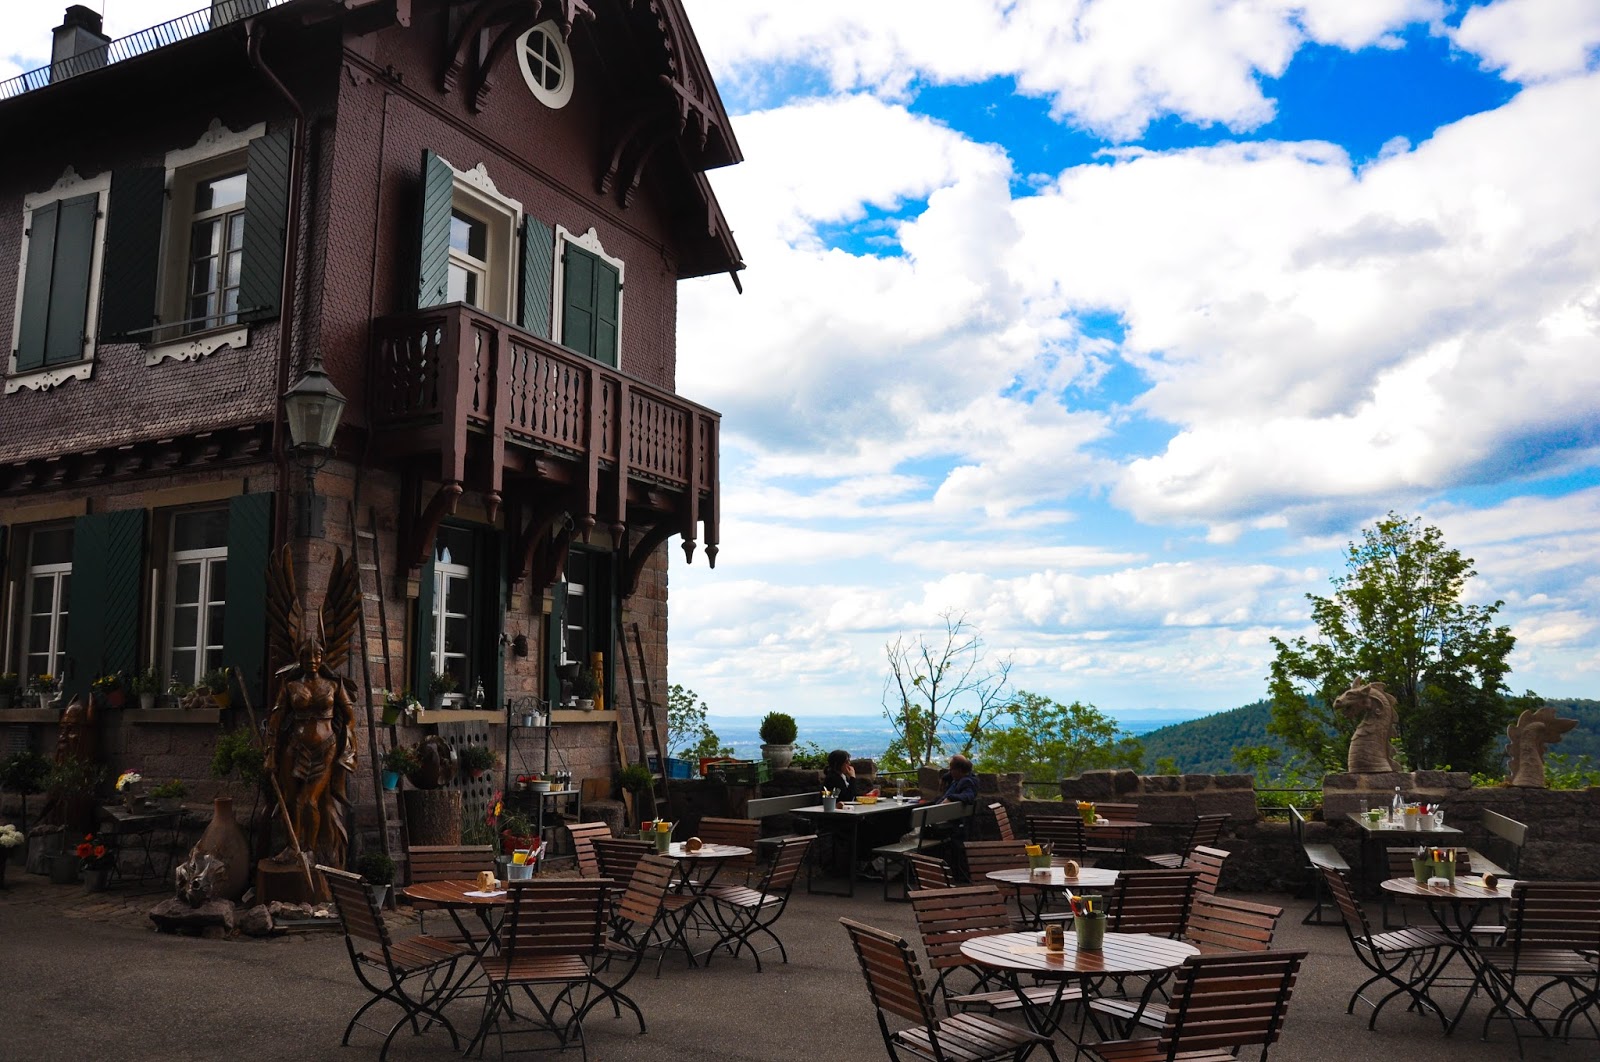 The outside seating area of the restaurant in the Yburg Castle, Yburg, Germany